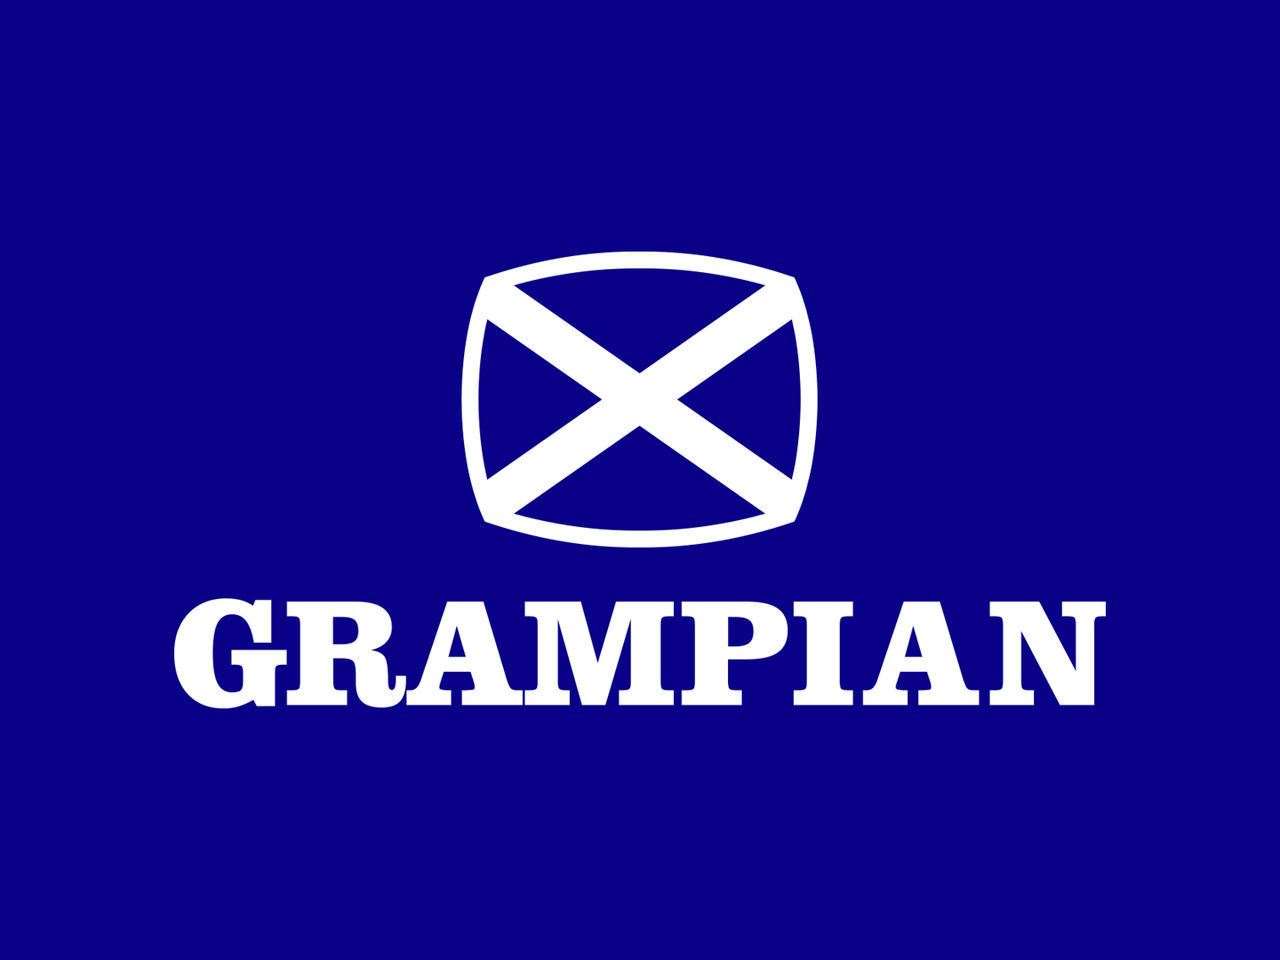 The Grampian TV ident was a common sight on screens across the whole of Scotland.